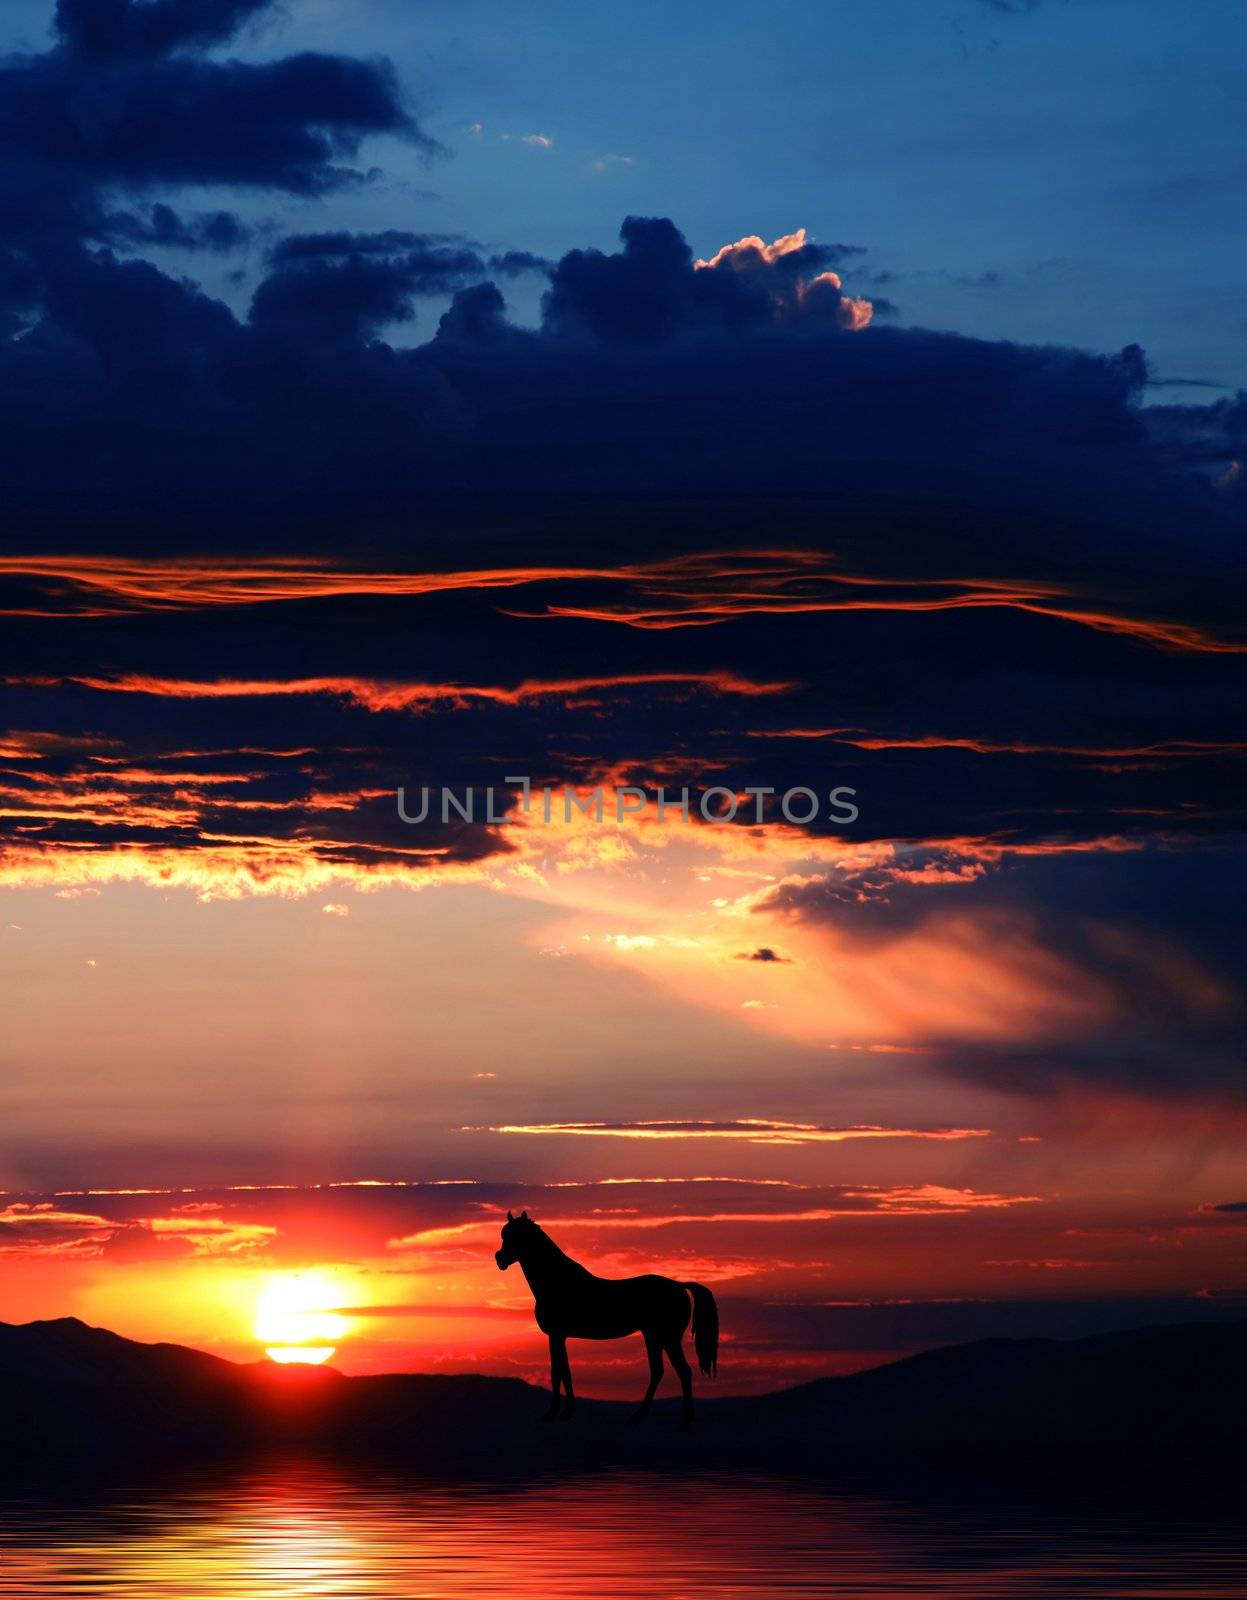 Beautiful mountains with horse silhouette and spectacular sunrise or sunset at Lake Tahoe in California and Nevada